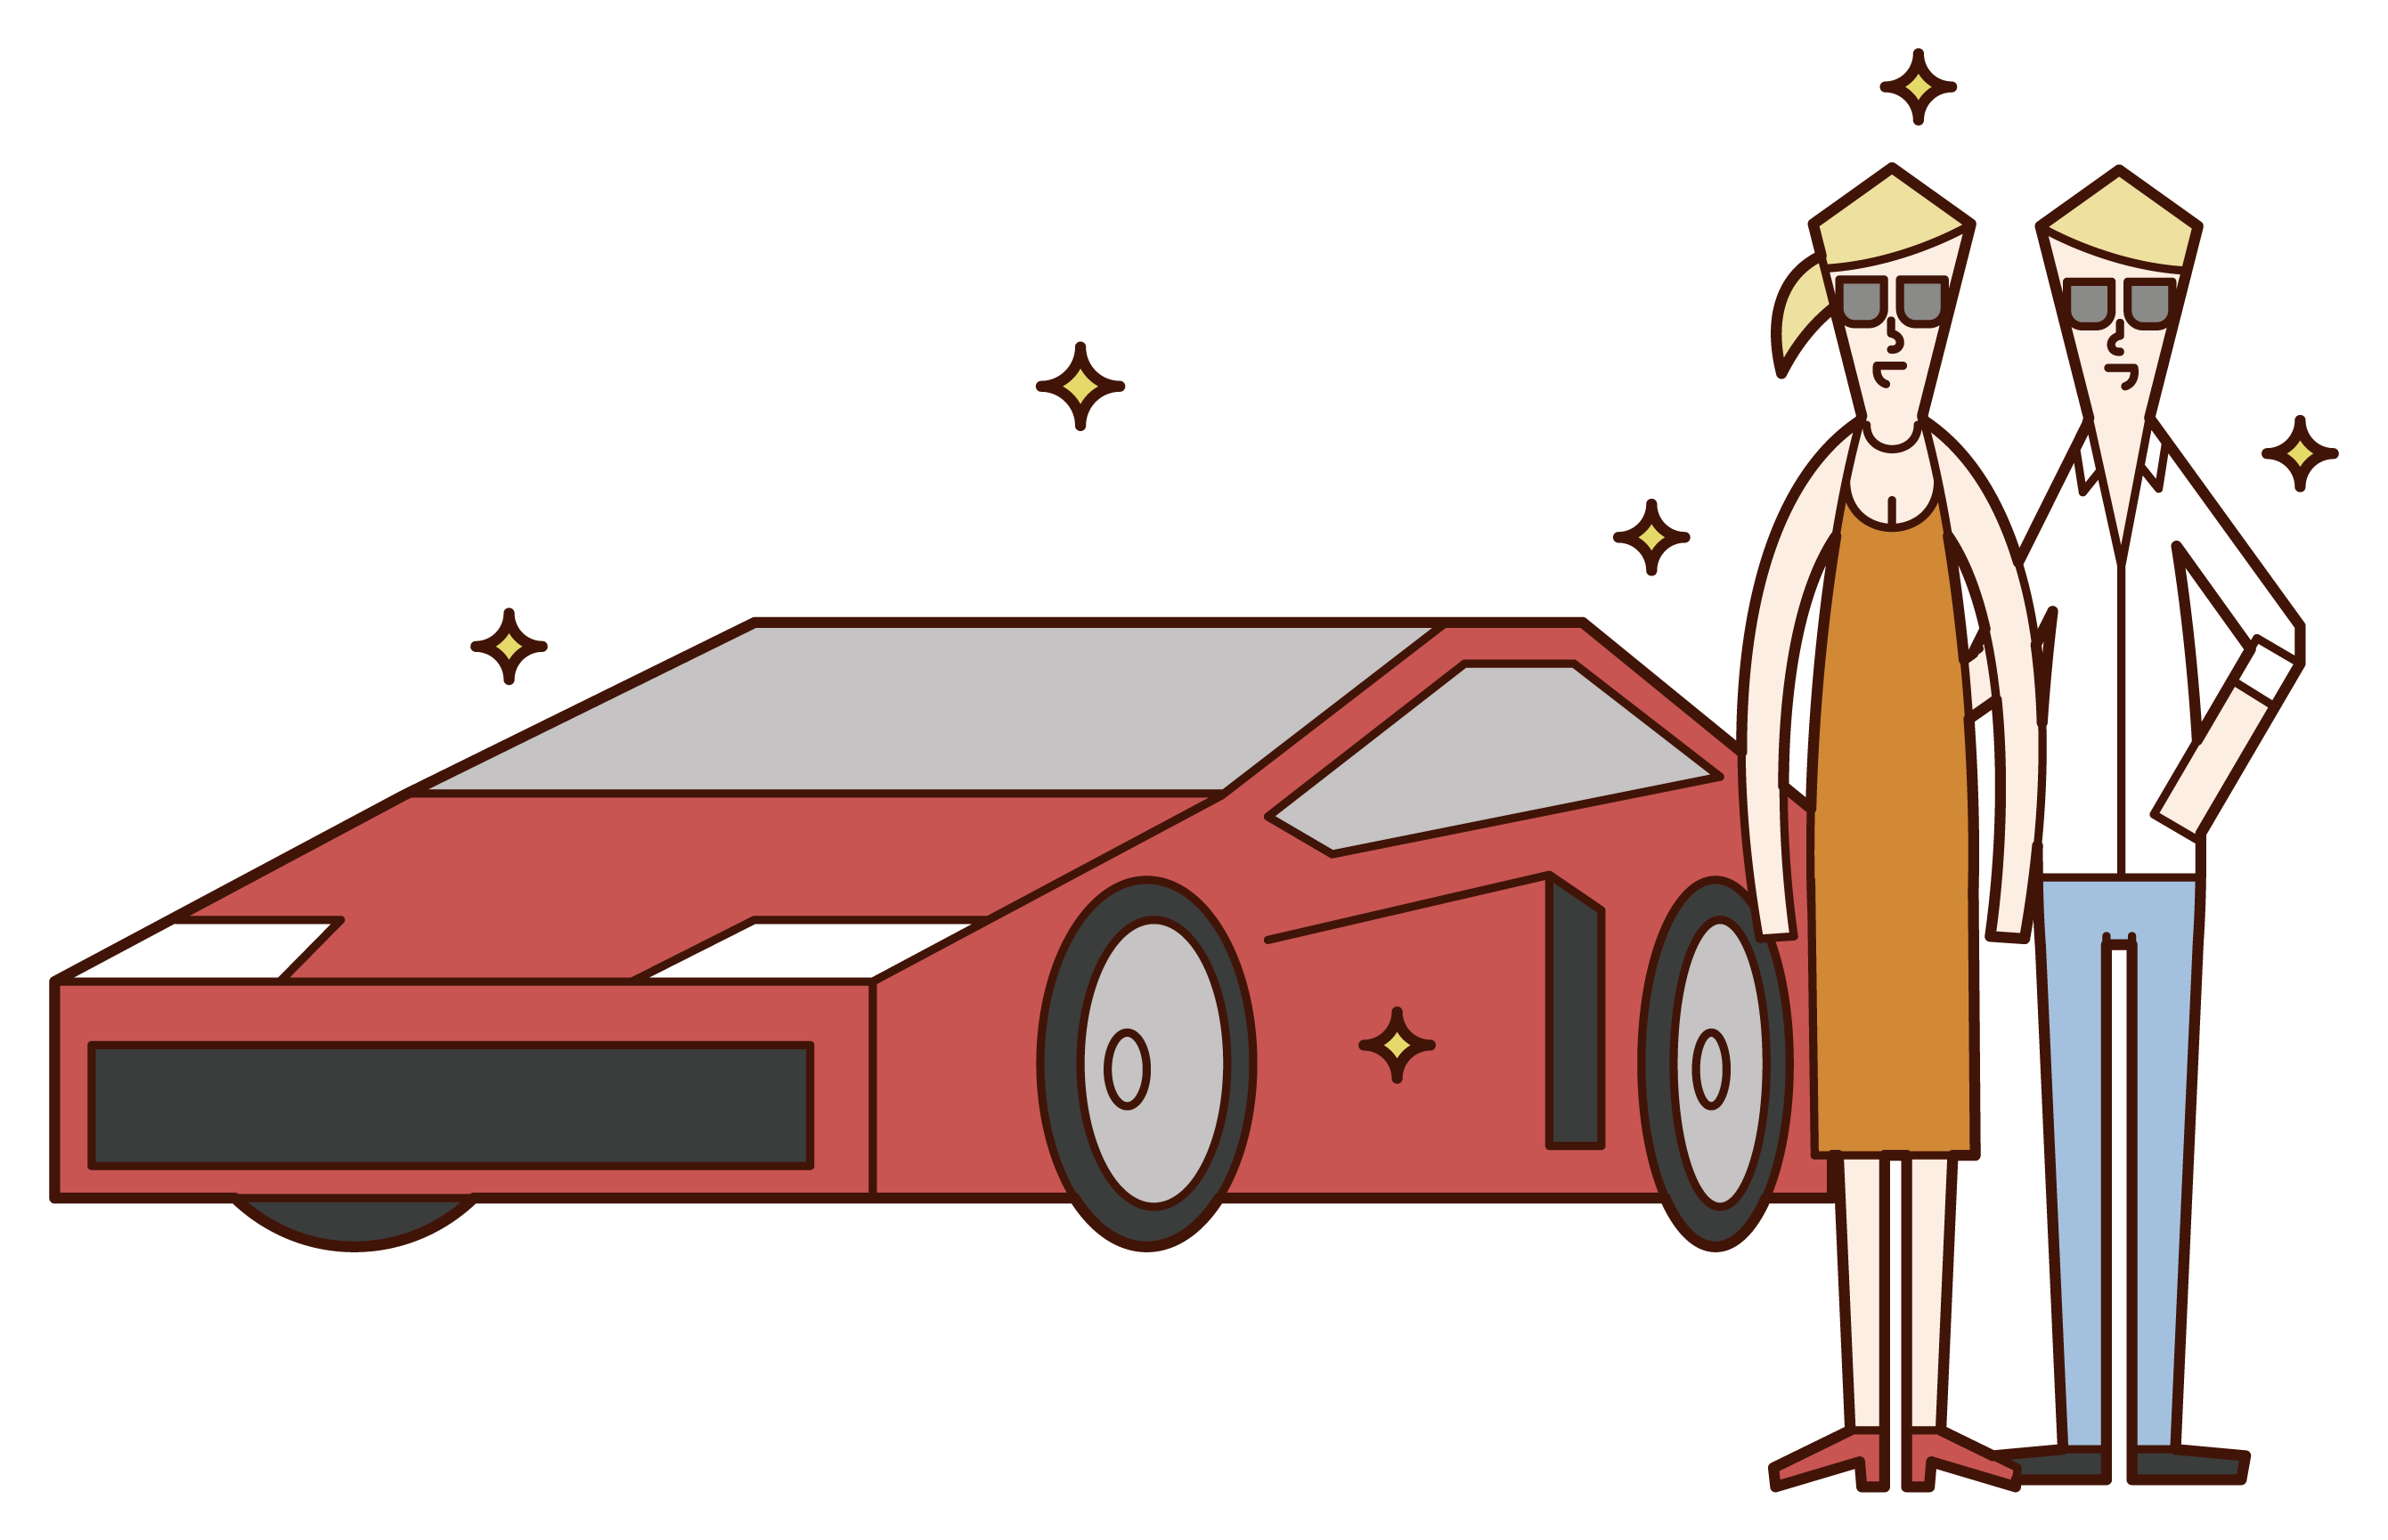 Illustration of a celebrity couple riding a supercar